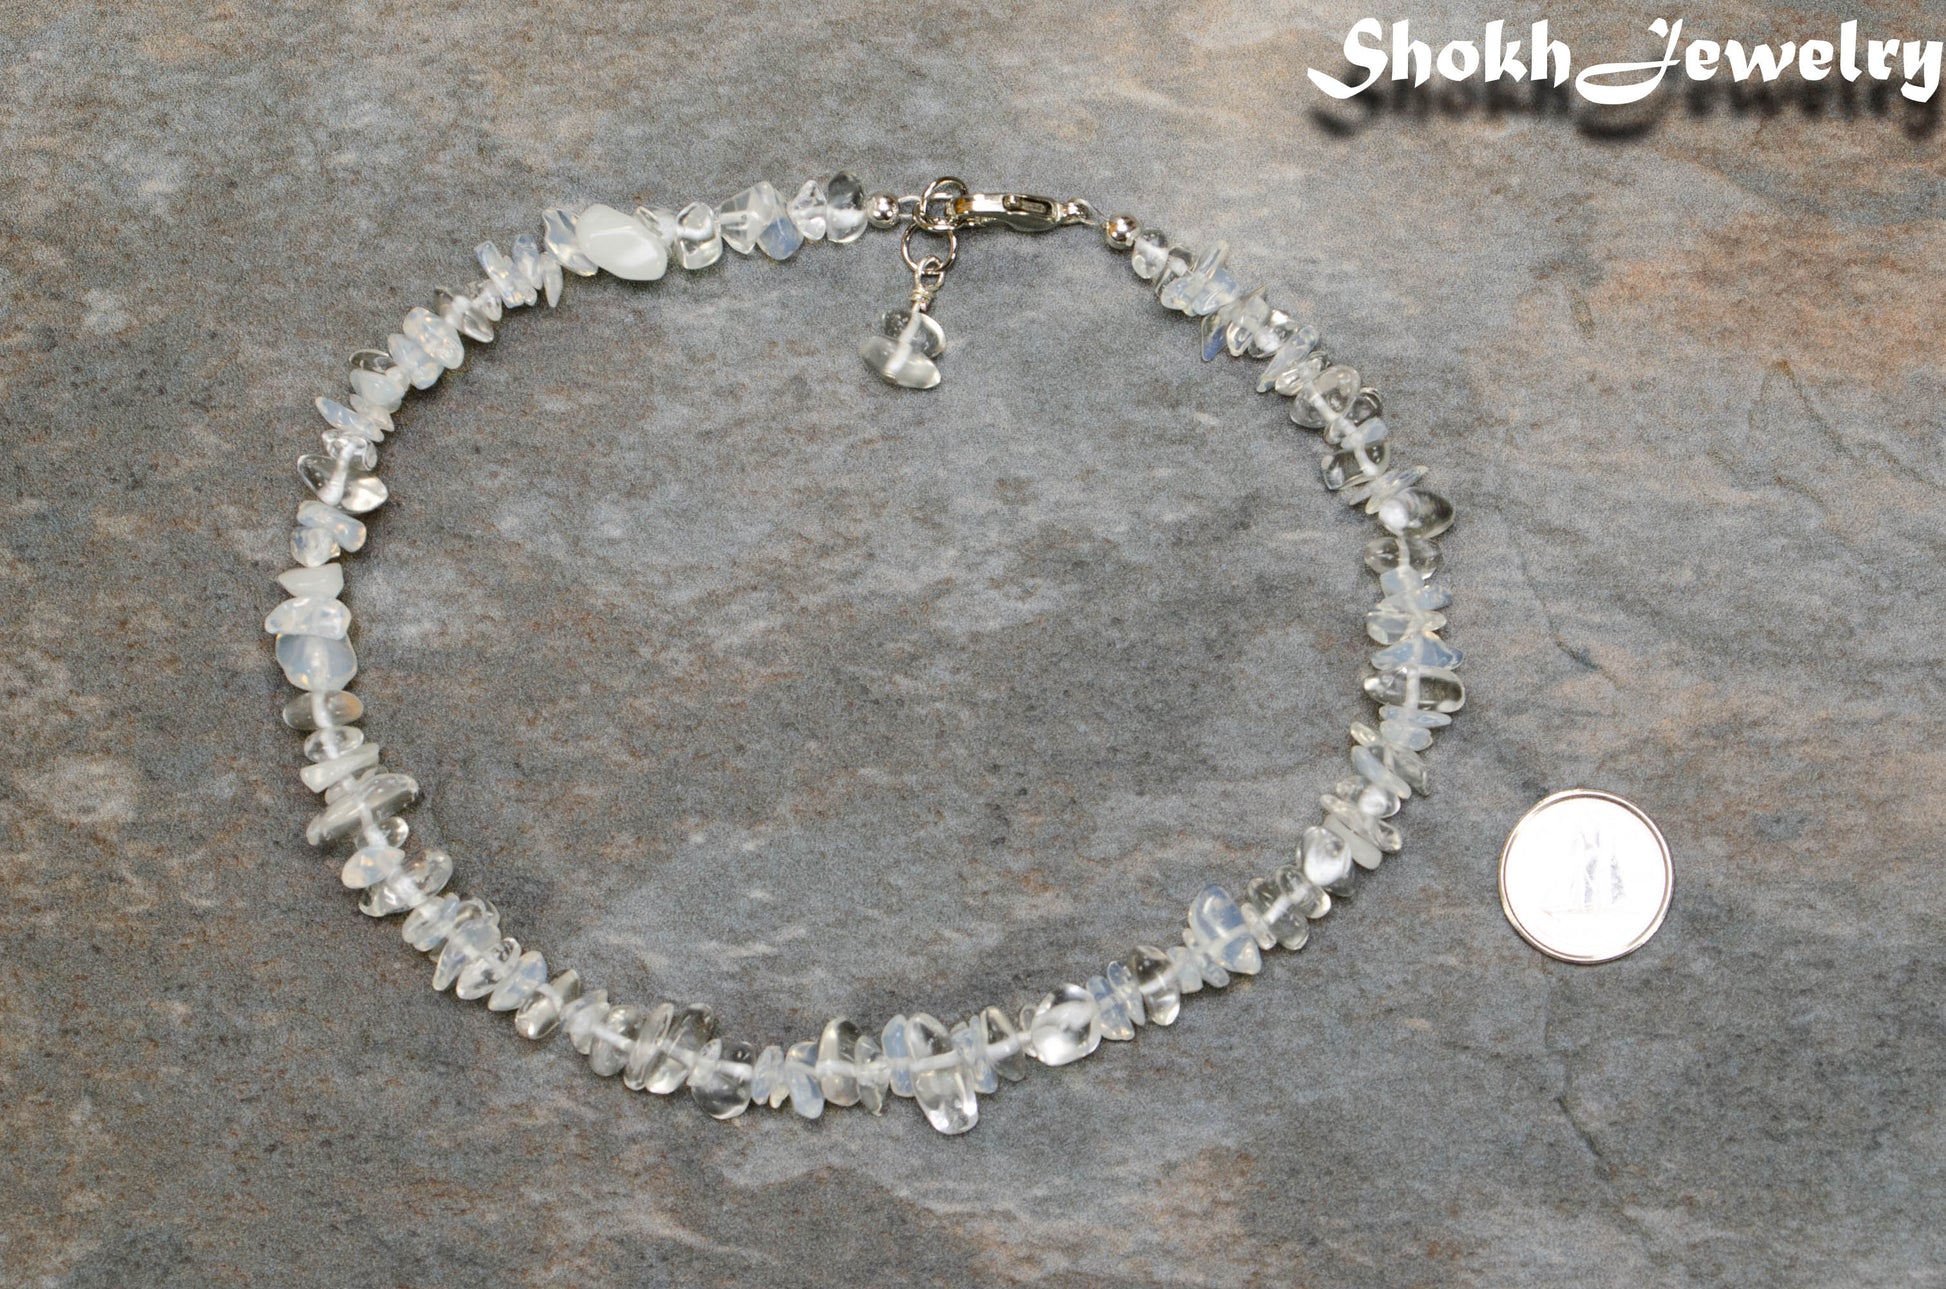 Natural White Opal Crystal Chip Anklet beside a dime.